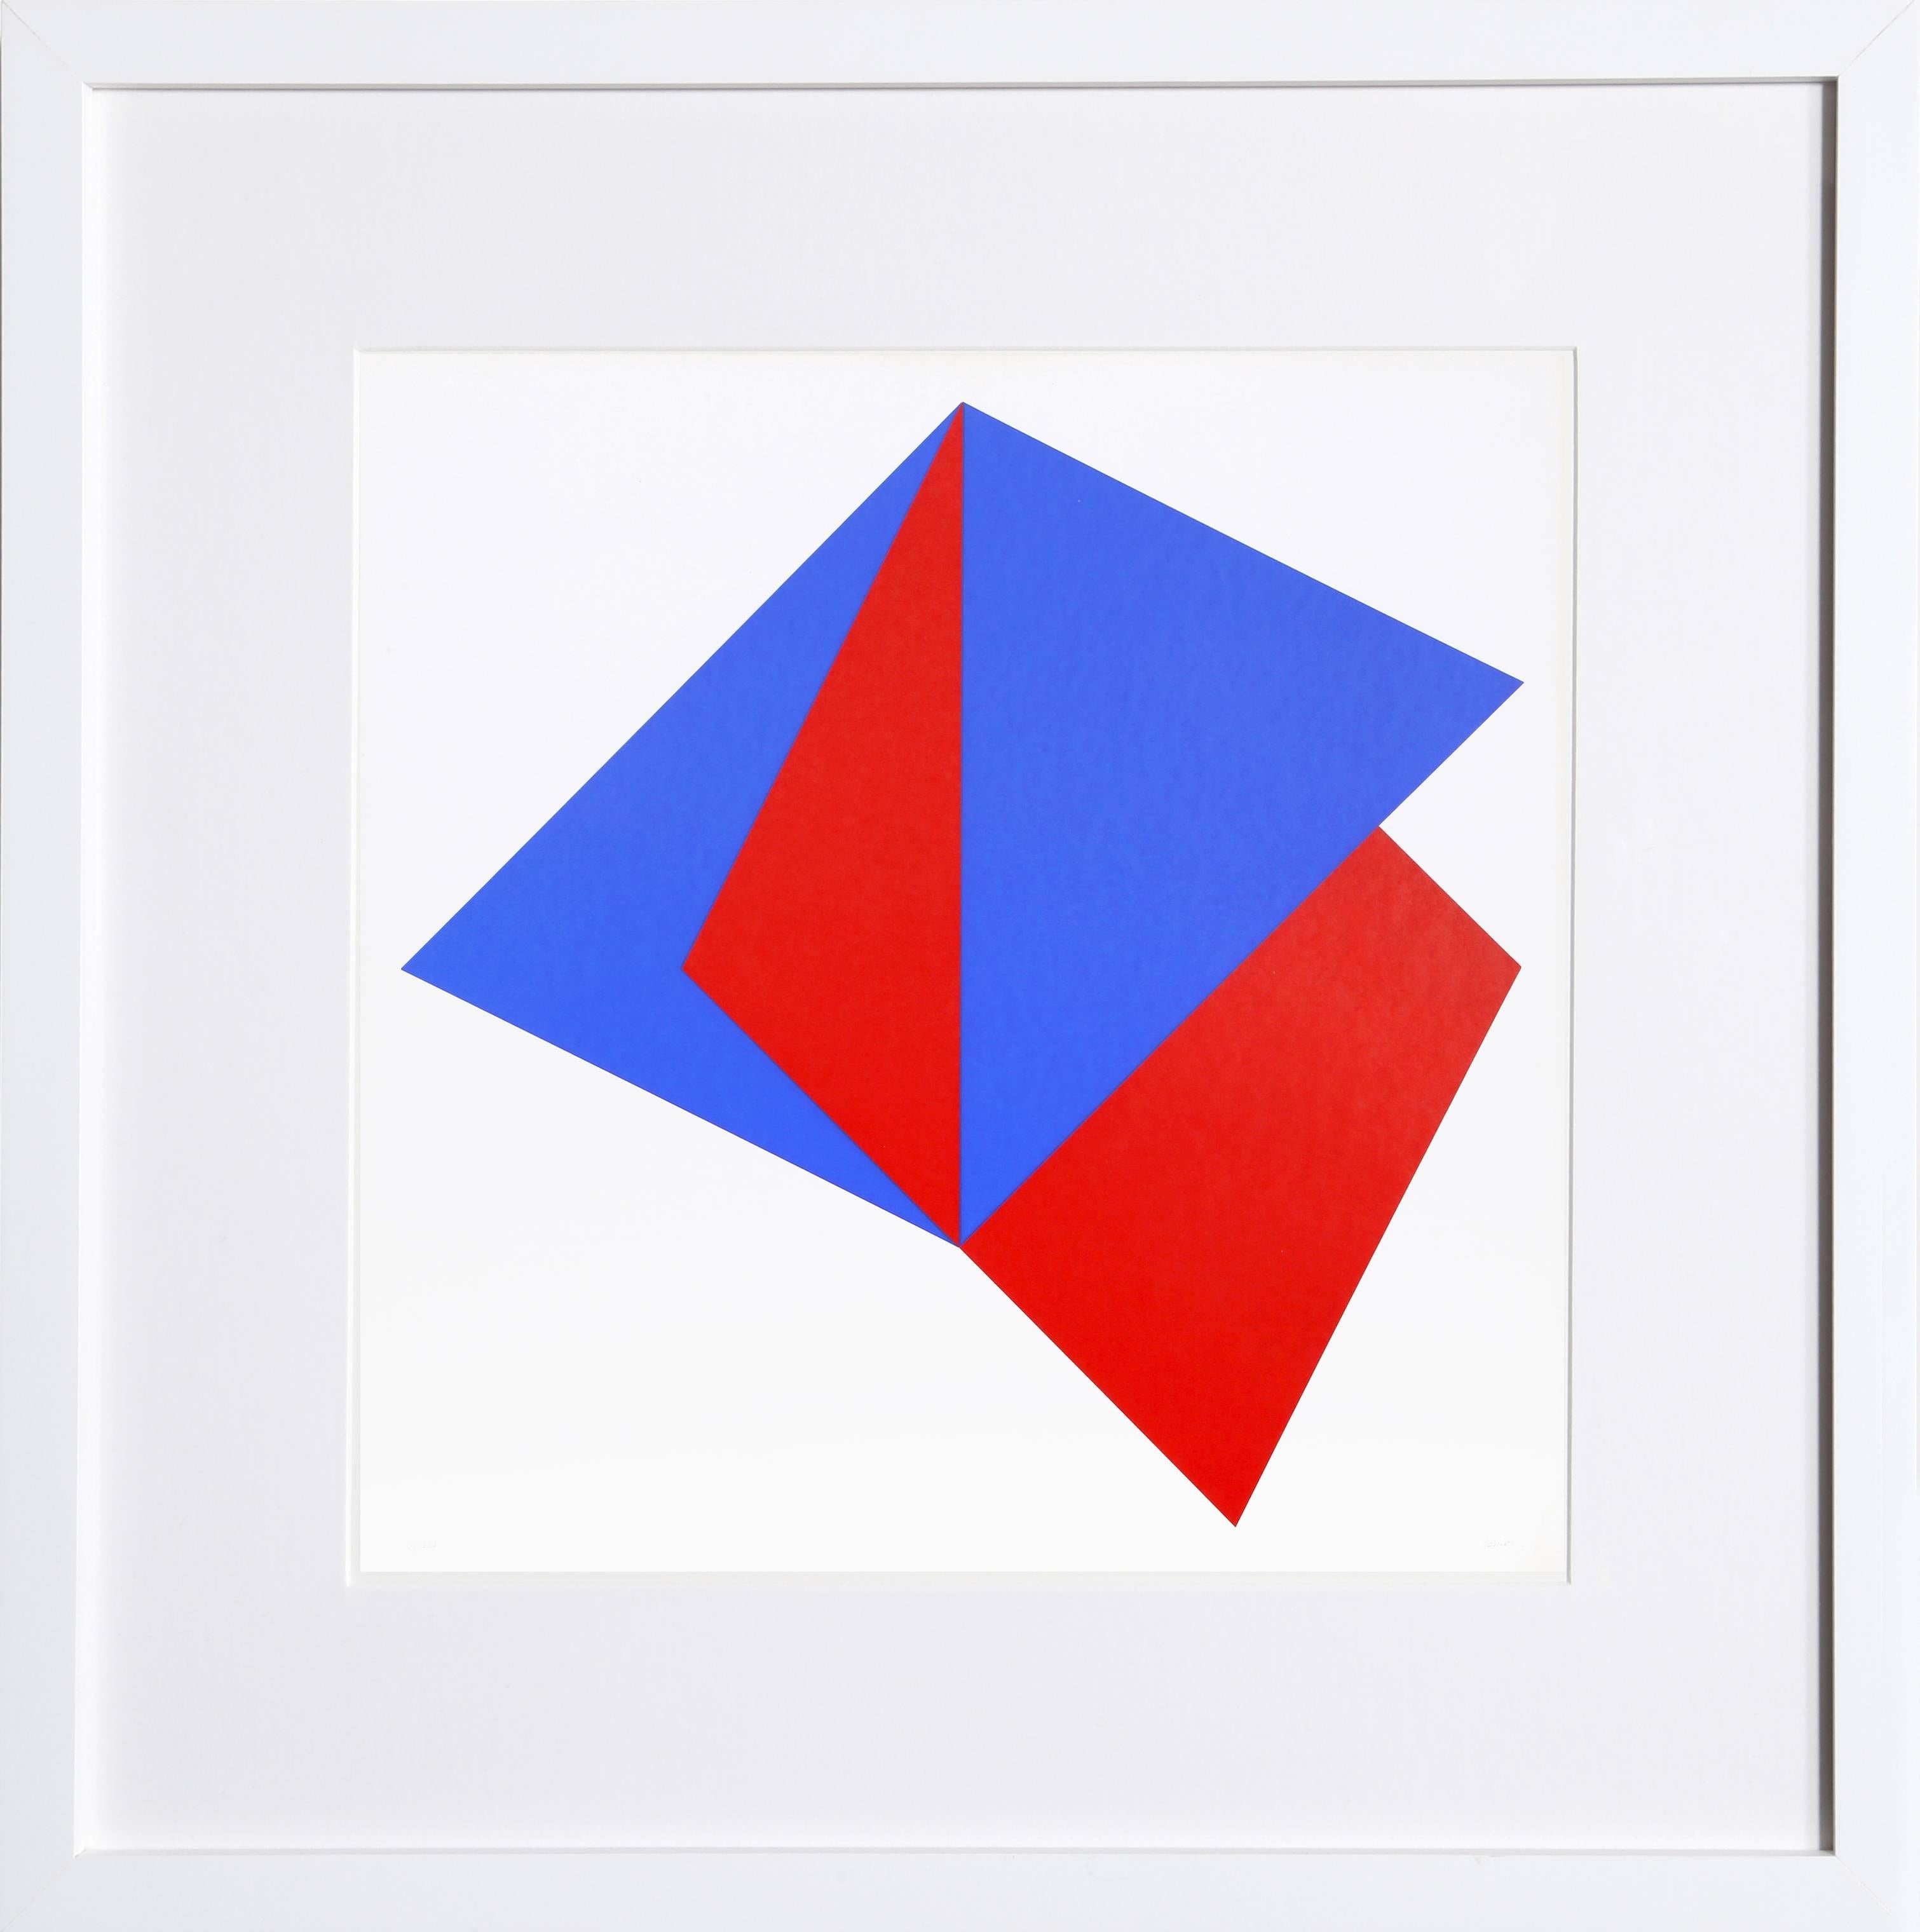 Bob Bonies Abstract Print - Untitled - Composition in Blue and Red I